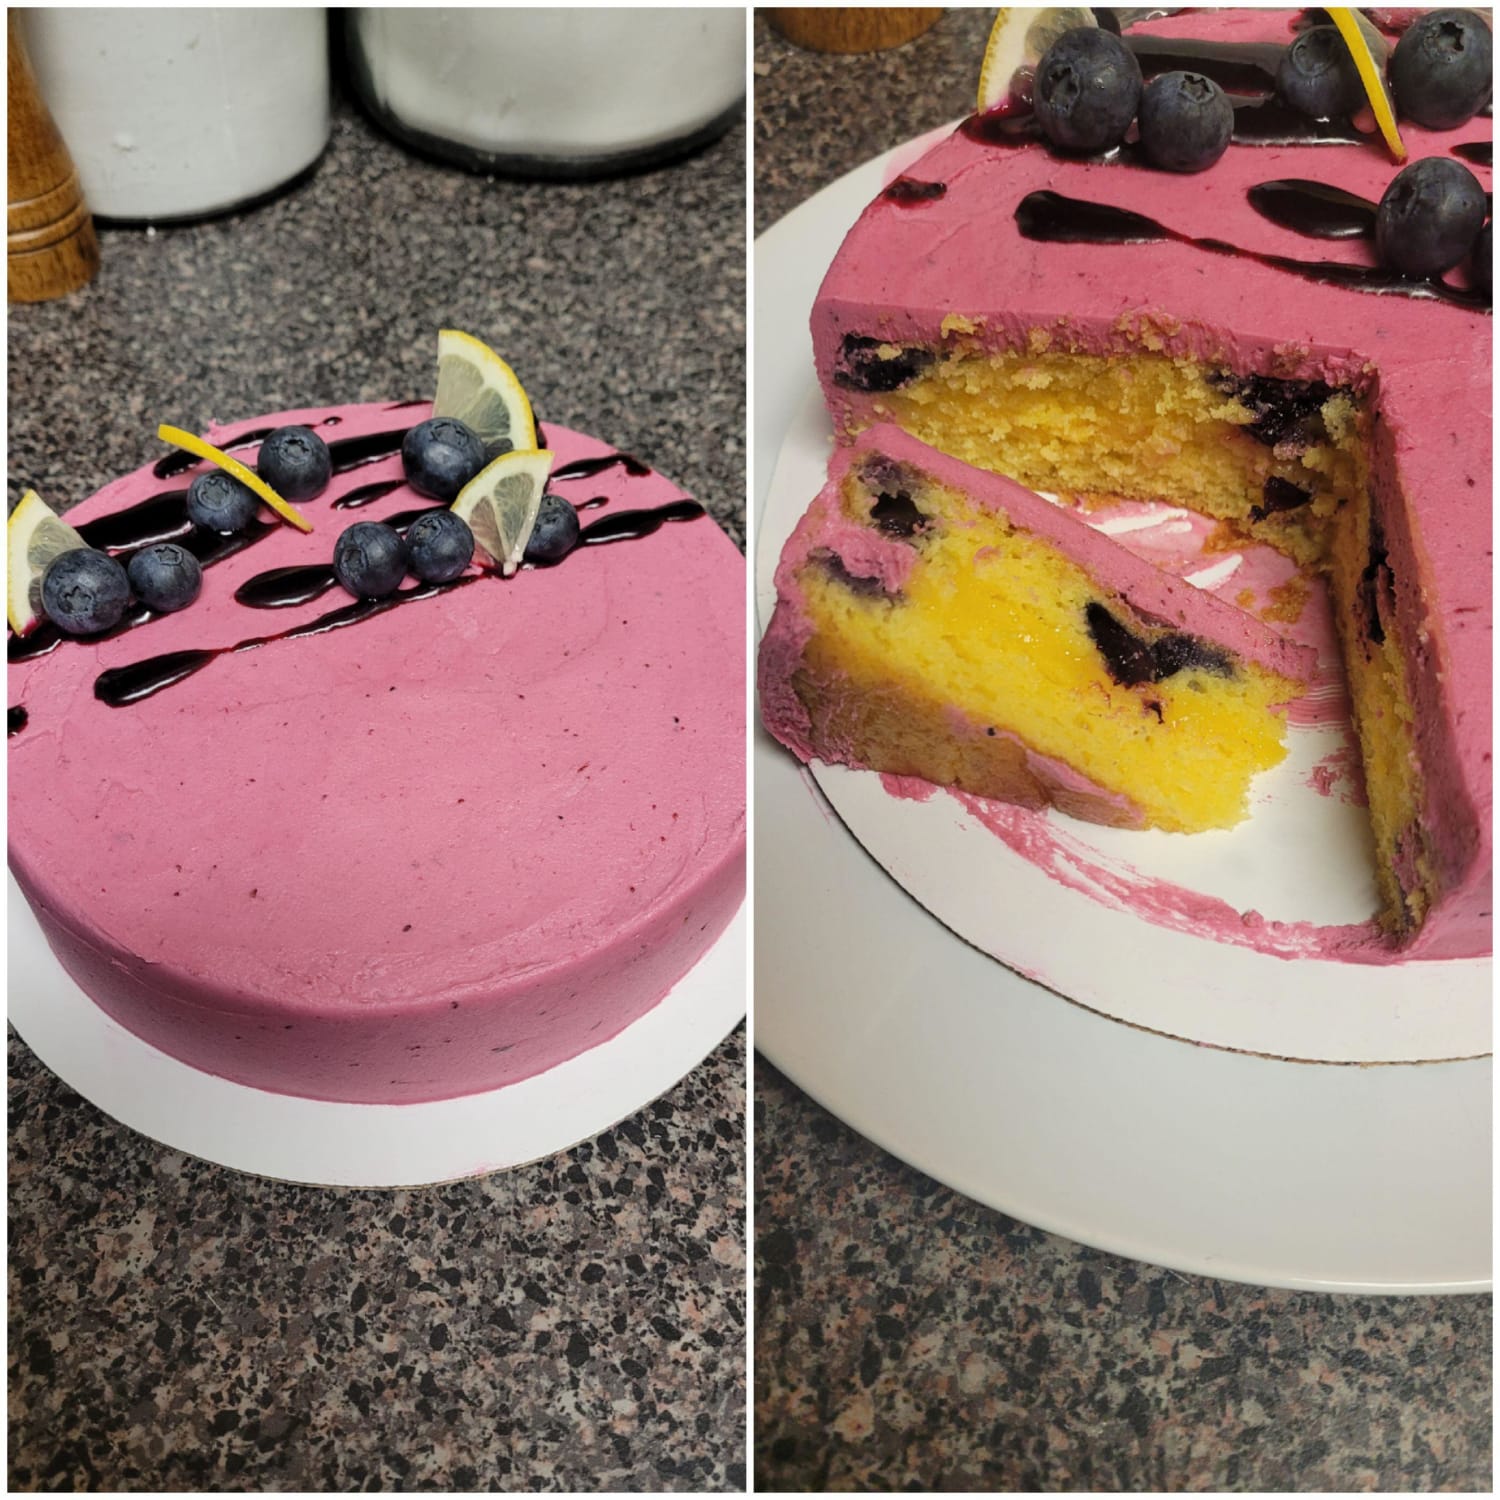 [Homemade] Lemon/blueberry cake filled with lemon curd and frosted with blueberry buttercream